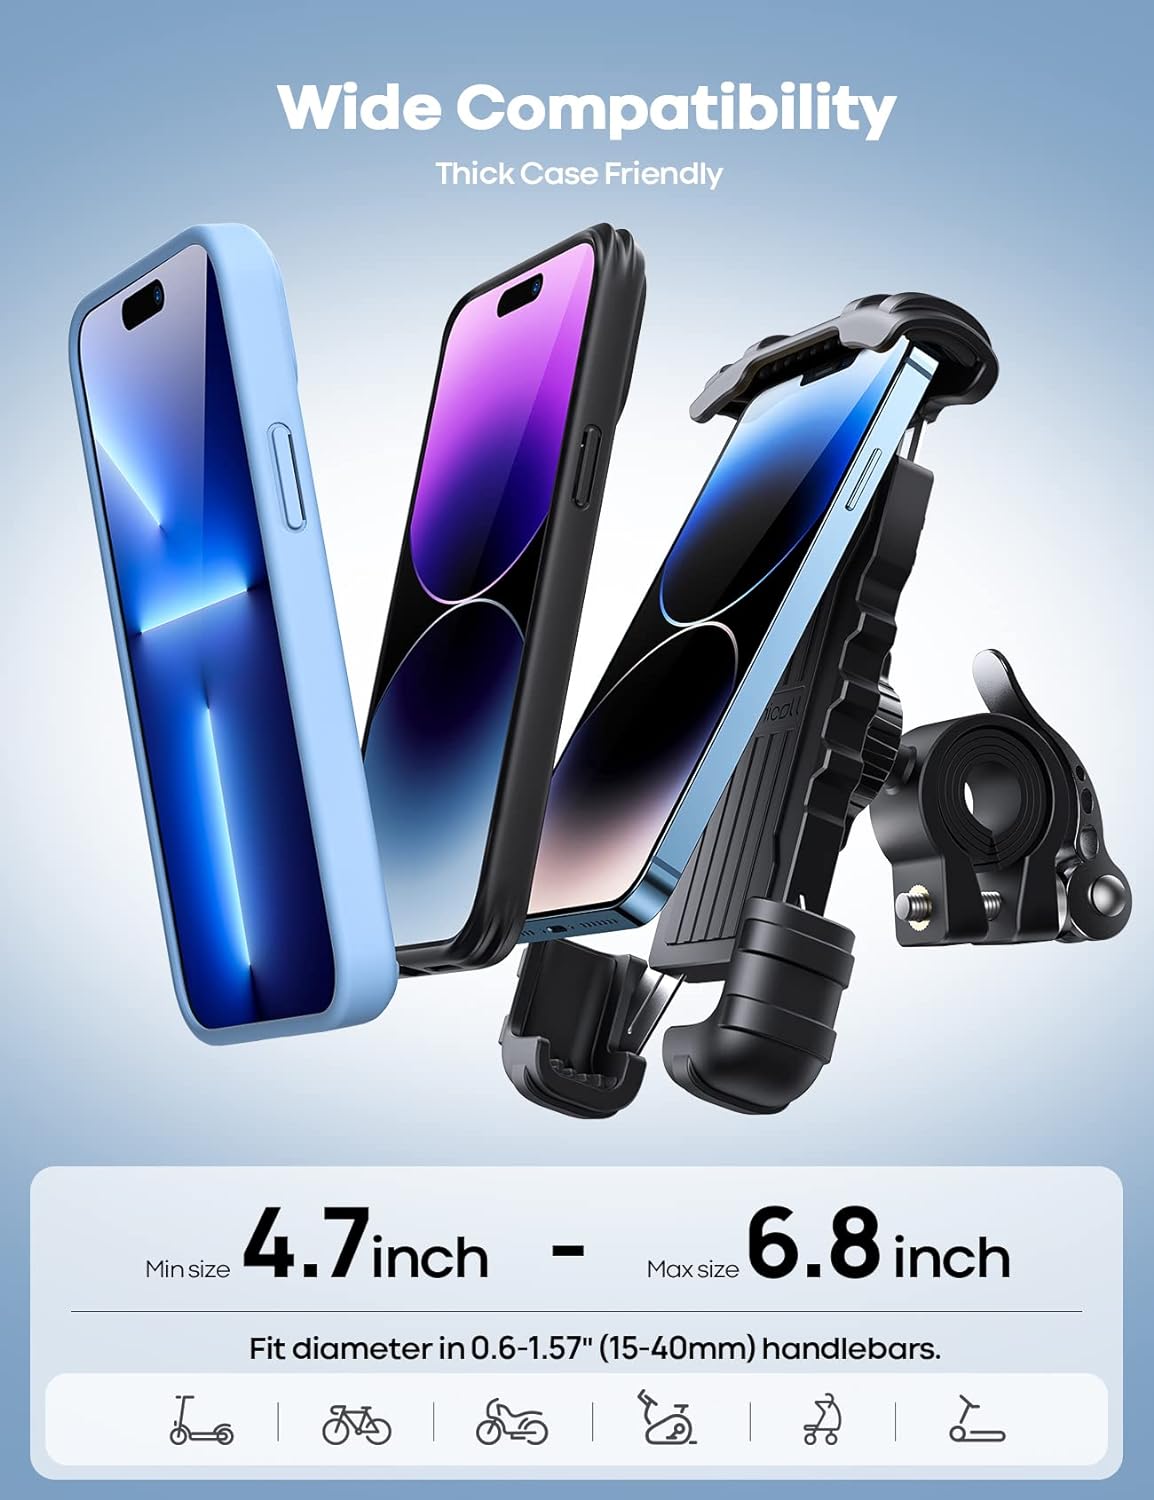 Lamicall Bike Phone Holder, Motorcycle Phone Mount - Motorcycle Handlebar Cell Phone Clamp, Scooter Phone Clip for iPhone 15 Pro Max/Plus, 14 Pro Max, S9, S10 and More 4.7" to 6.8" Smartphones